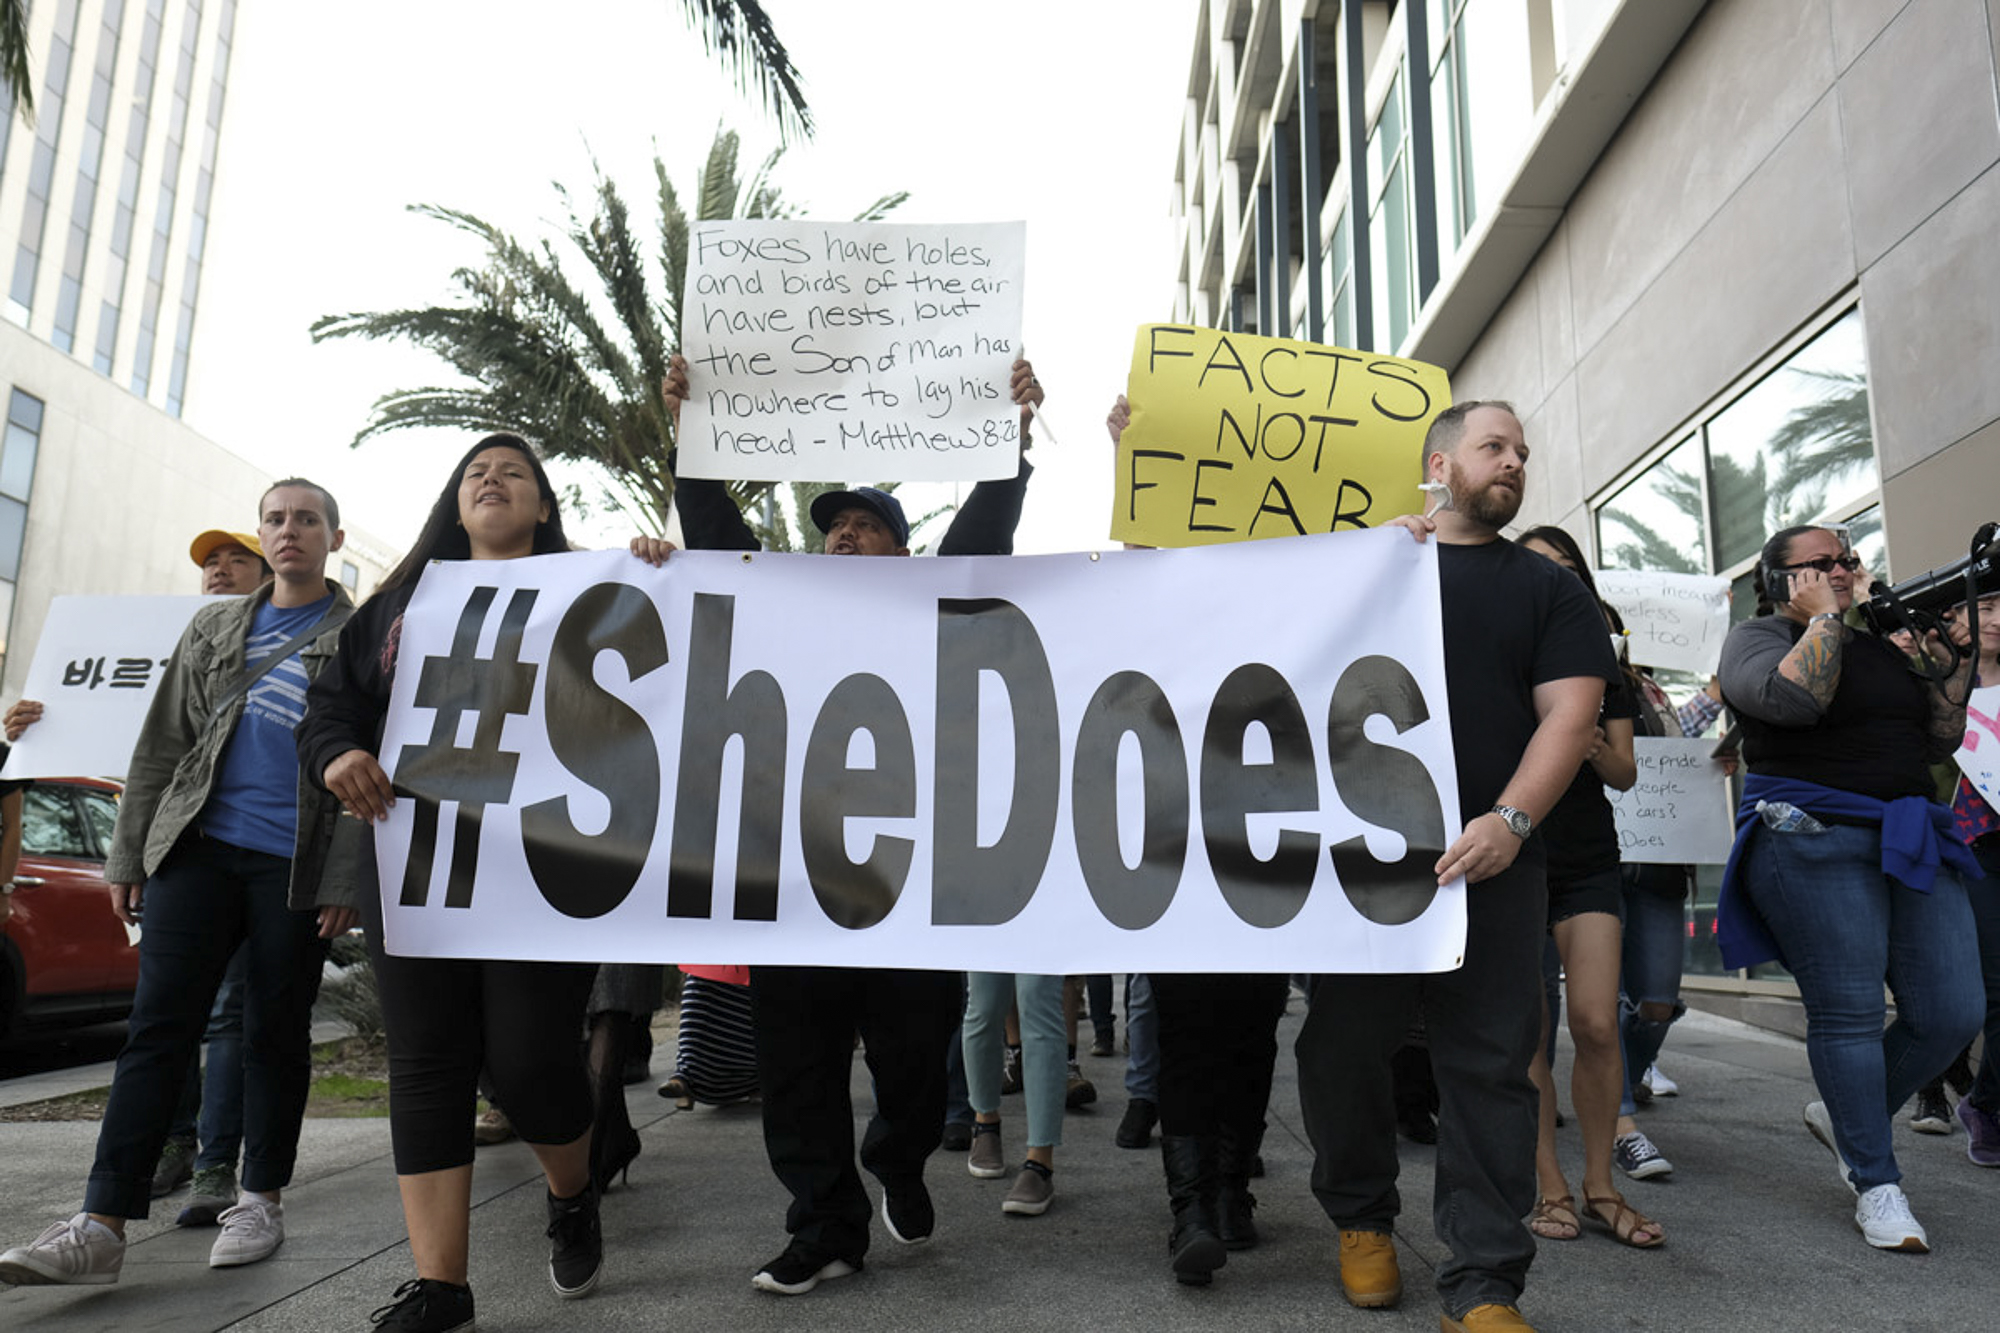  #Shedoes protesters march down the streets of Koreatown to support a homeless shelter being built in the city in Los Angeles, California on May 26, 2018. (Jayrol San Jose/Corsair Contributor) 